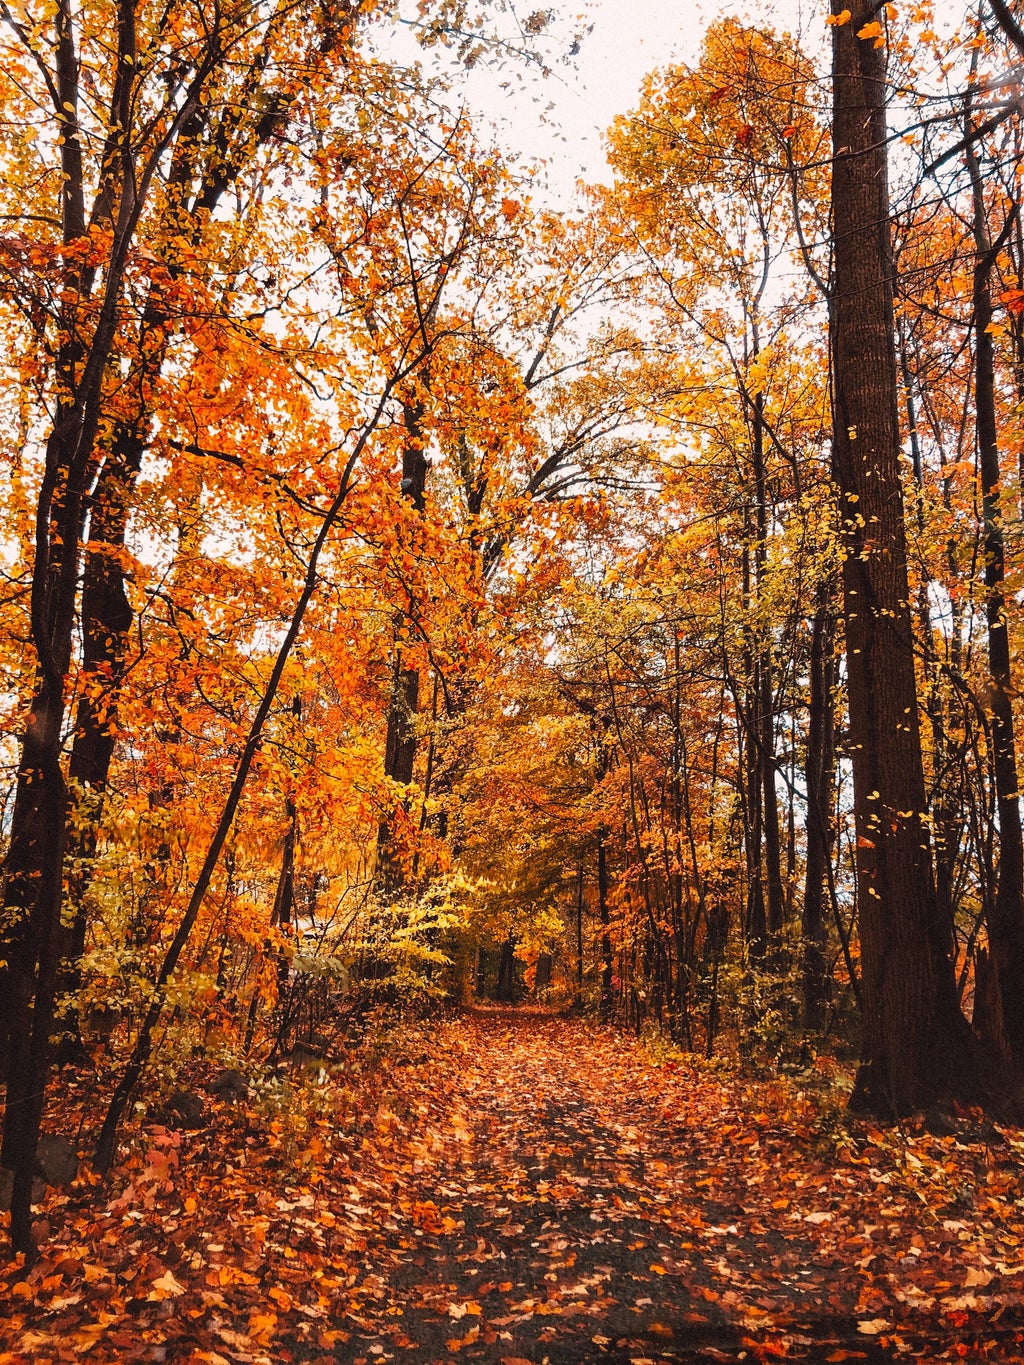 Trees with fall leaves and a pathway through the forest